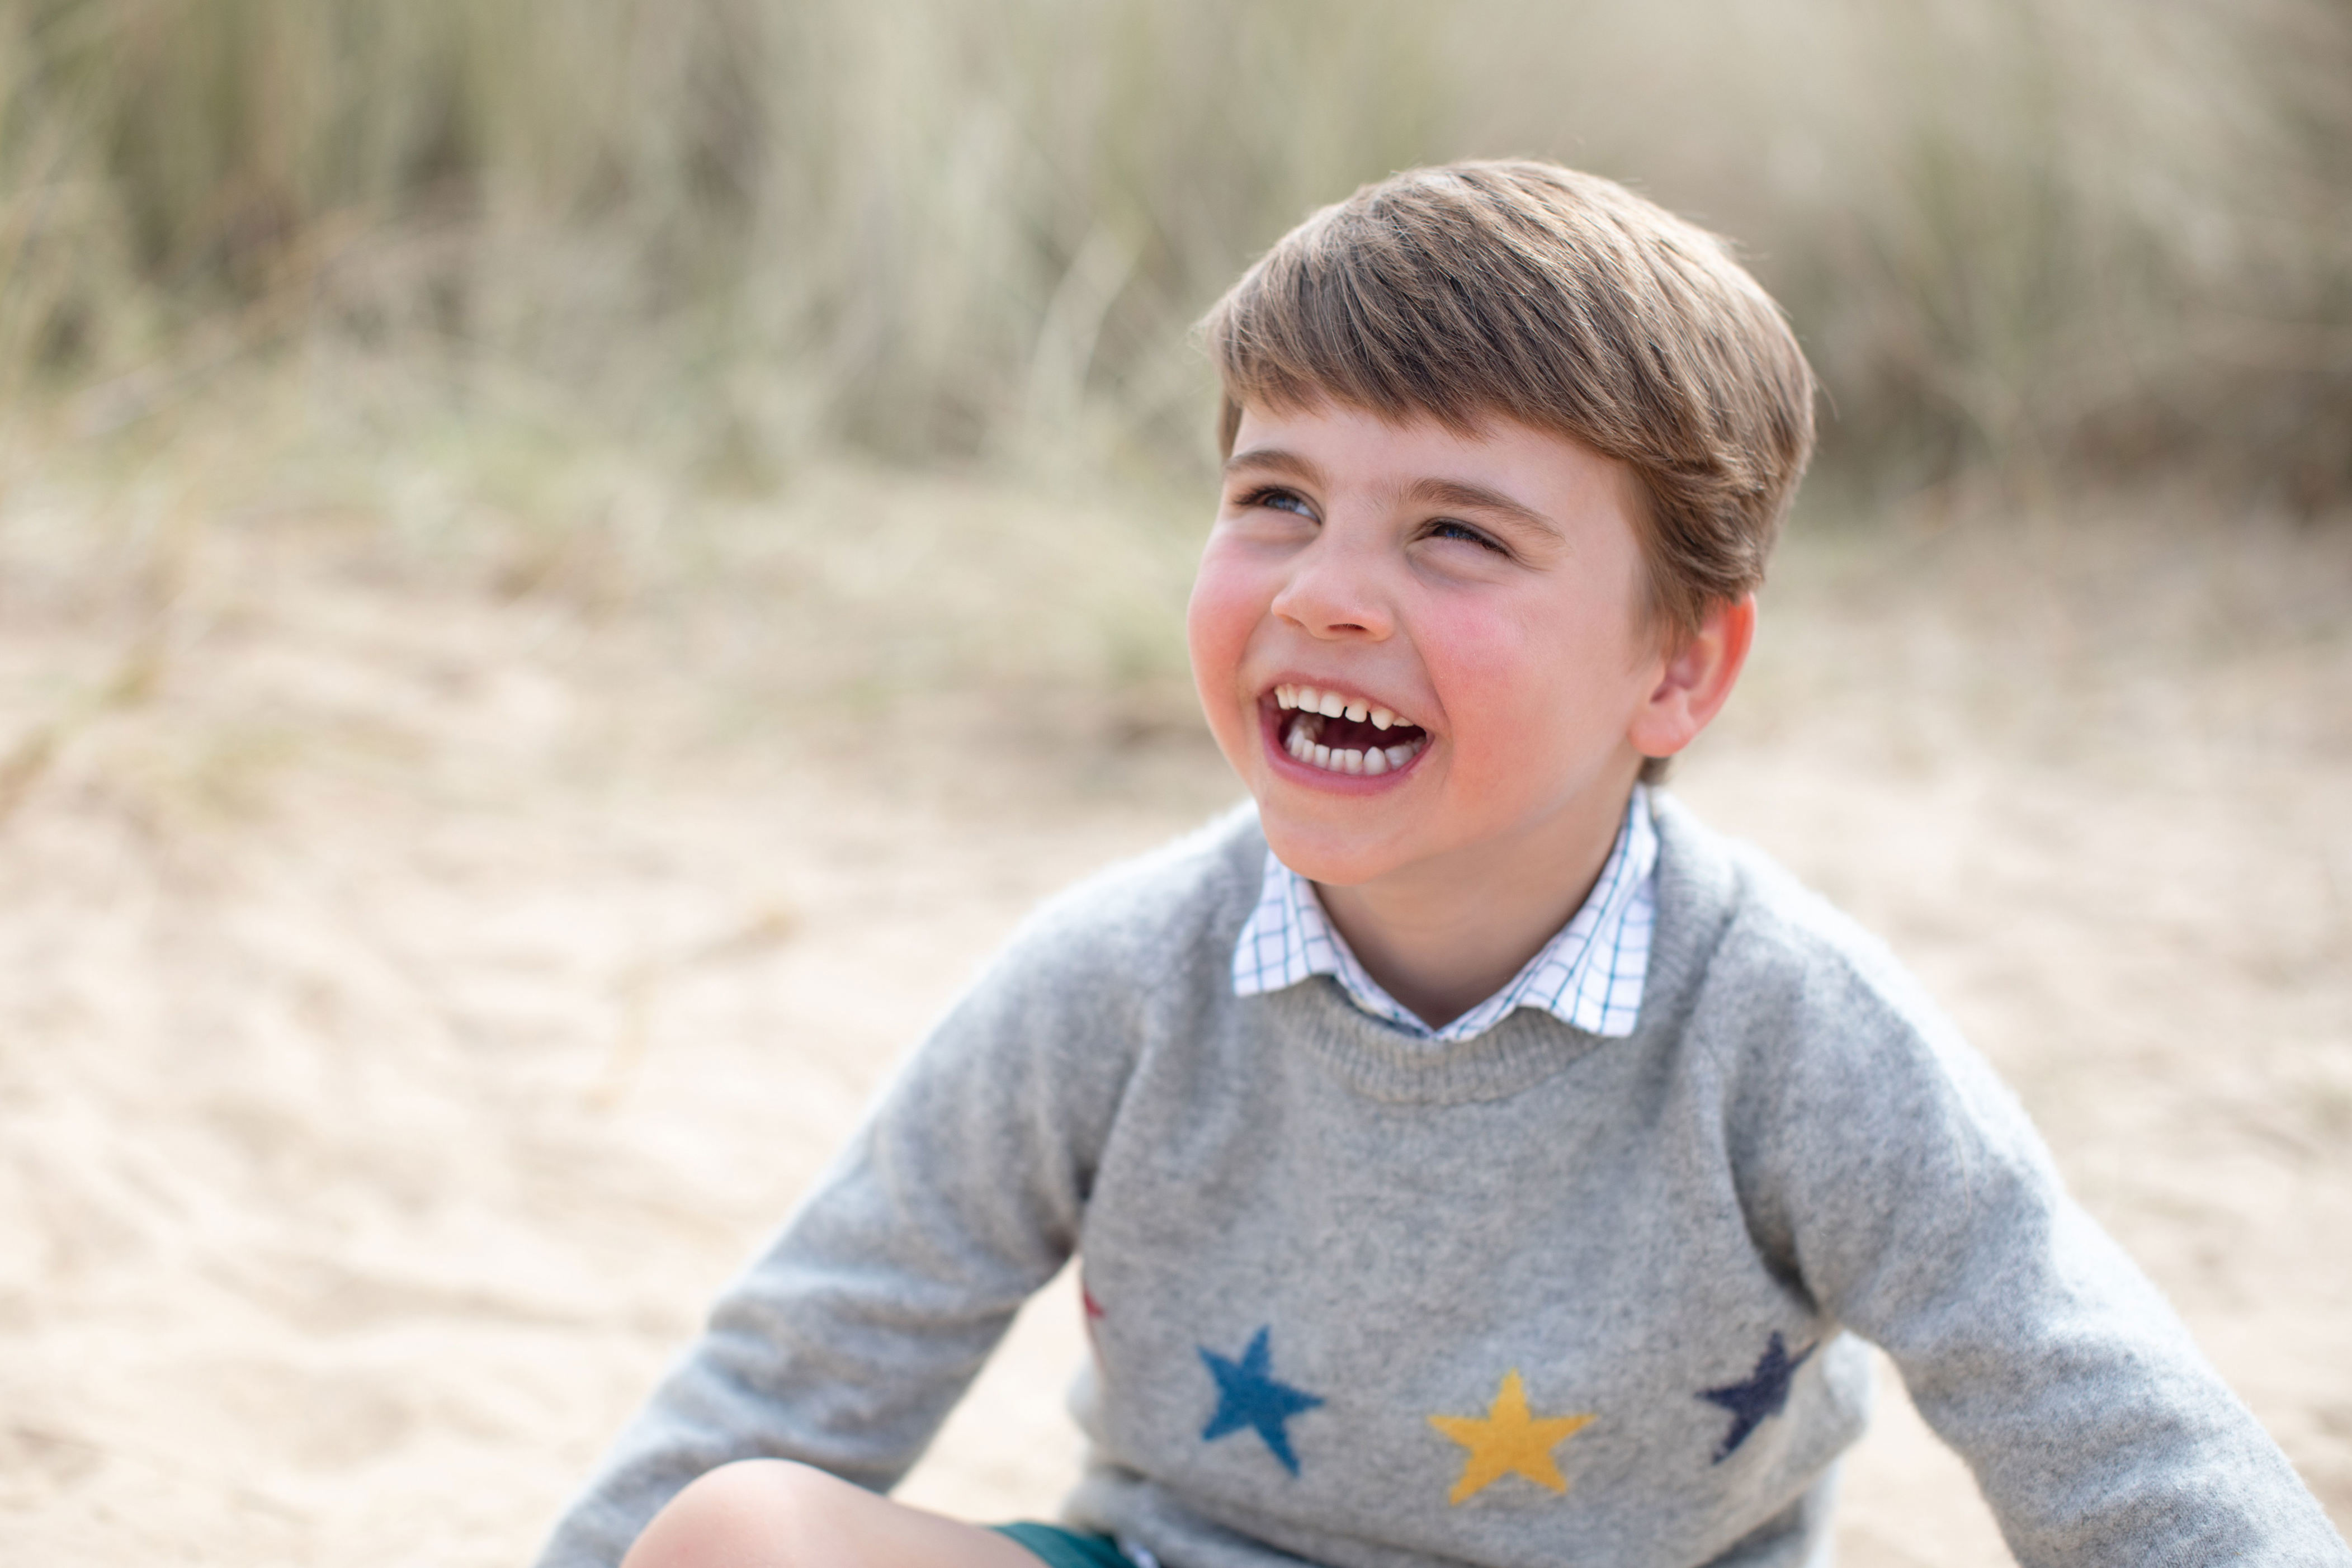 <p>Kensington Palace released this photo of Prince Louis, which was taken by his mother, <a href="https://www.wonderwall.com/celebrity/profiles/overview/duchess-kate-1356.article">Duchess Kate</a>, at a beach in Norfolk, England, to mark his 4th birthday on April 23, 2022. </p>